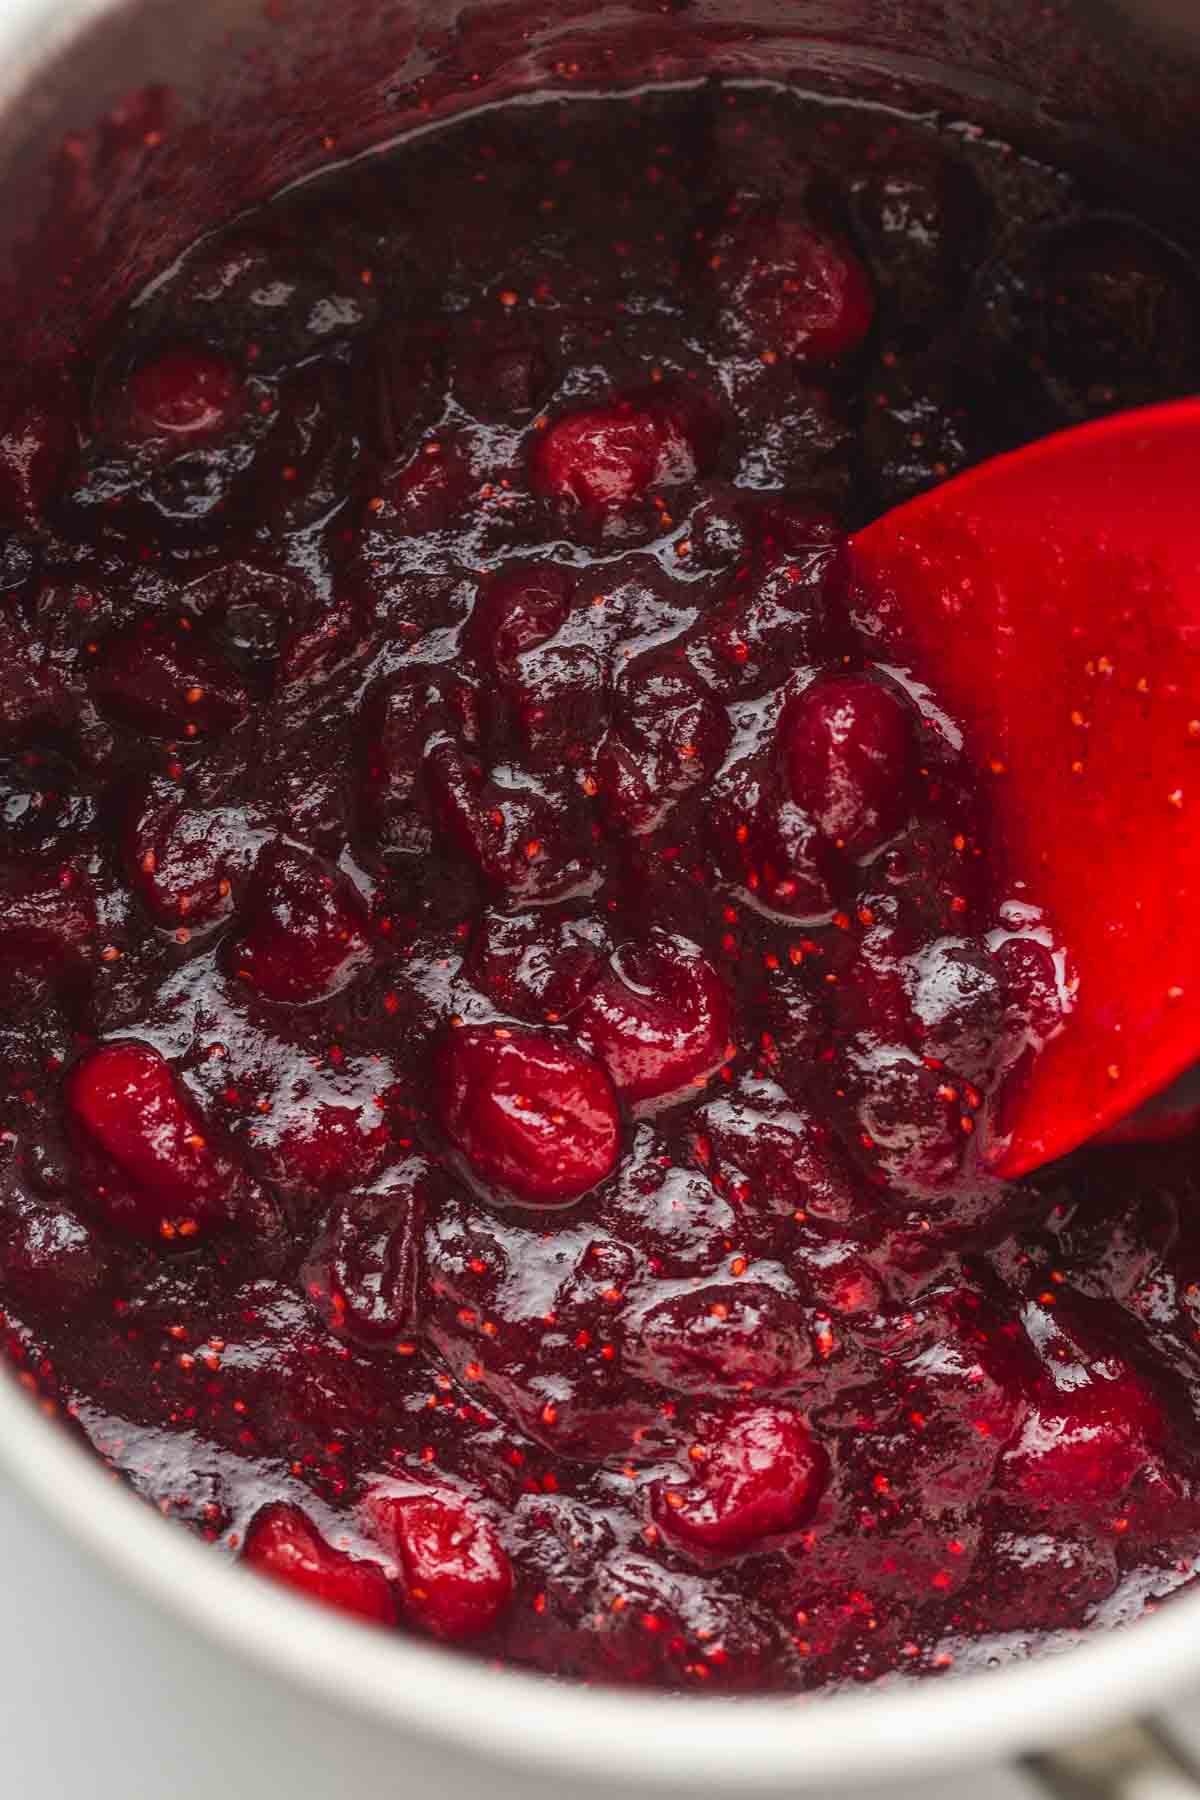 Cooking cranberries in a small saucepan with a rubber spatula